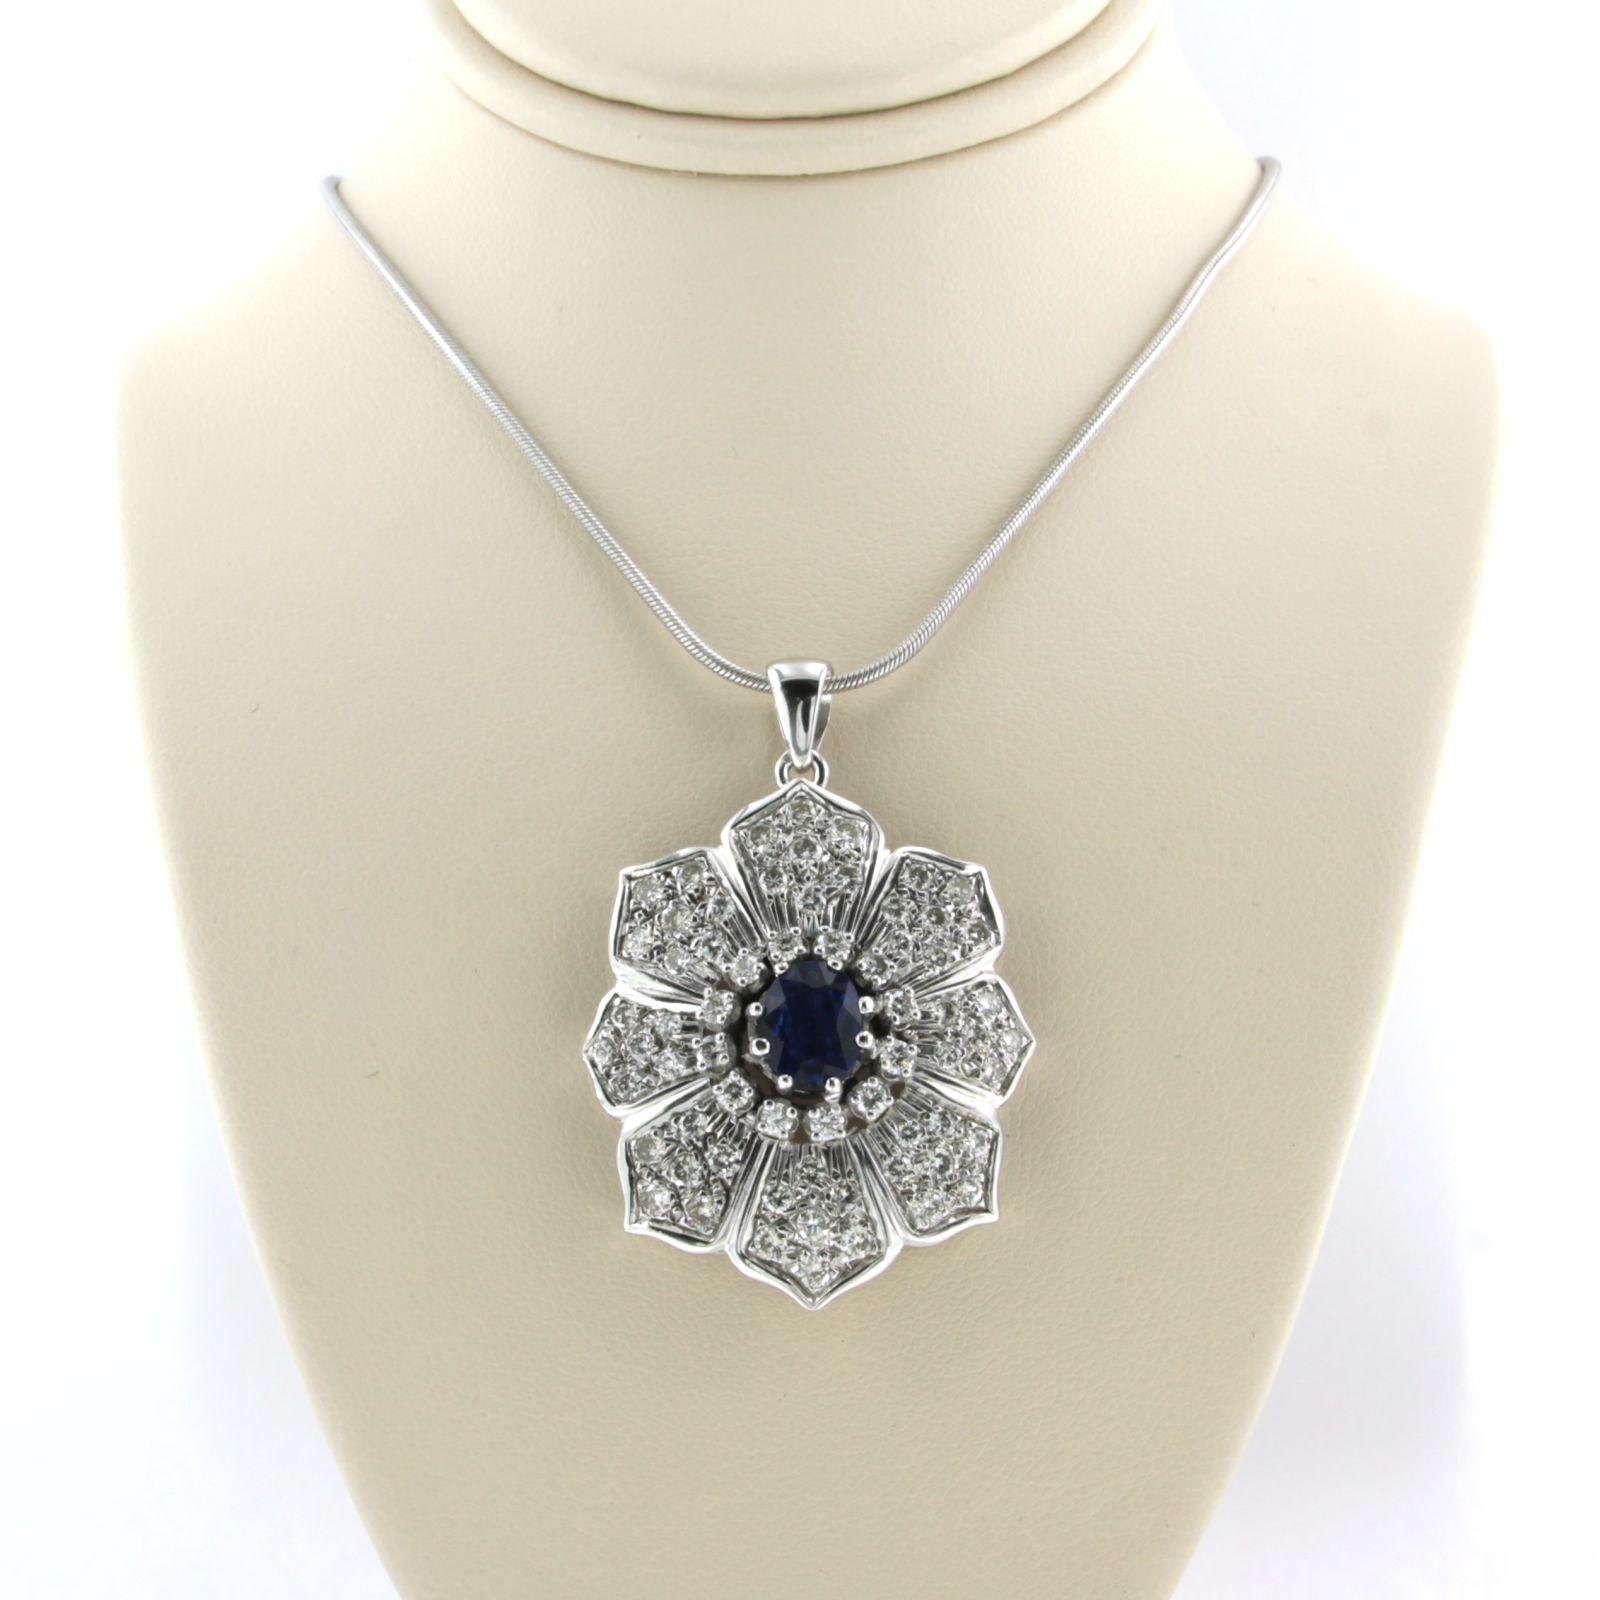 14k white gold necklace with pendant set with sapphire totaling approximately 1.45ct and brilliant cut diamond totaling approximately 2.00ct - F/G - VS/SI - 50 cm long

detailed description:

the necklace is 50 cm long and 1.1 mm wide

the pendant